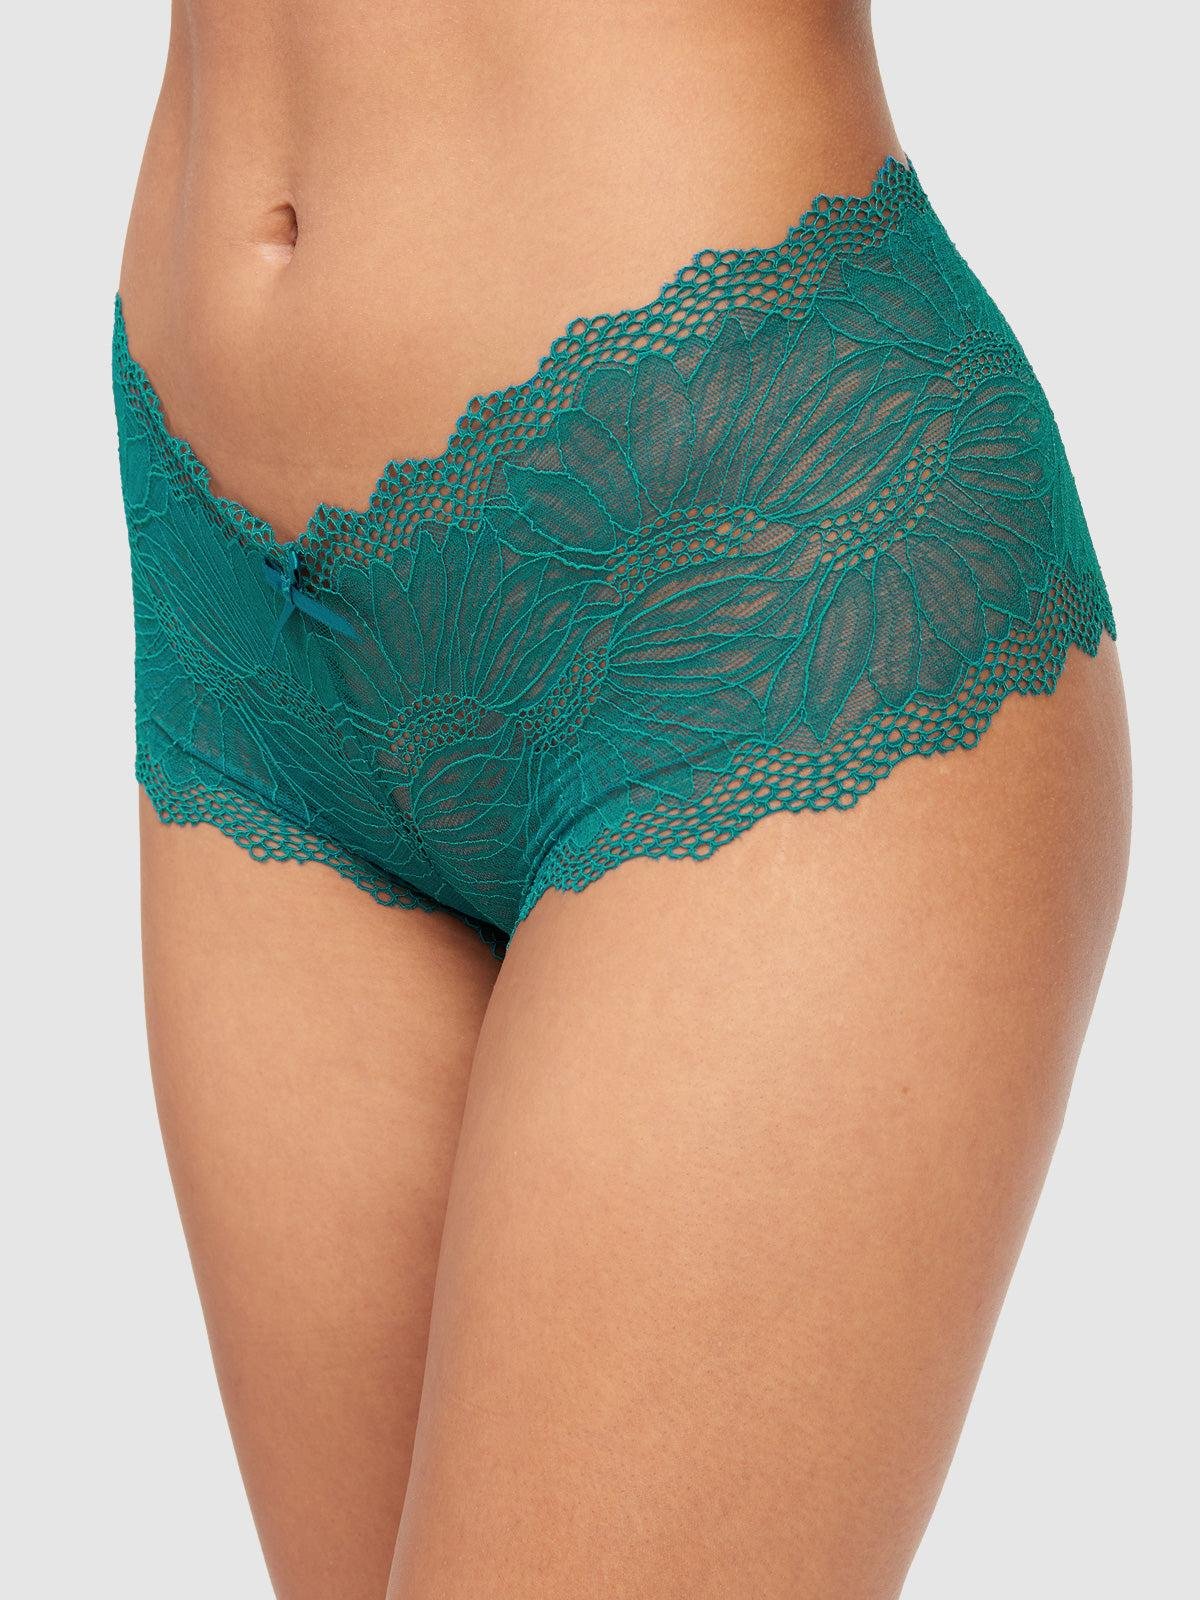 Saffron Floral Lace Cheeky in Shaded Spruce by FREDERICK'S OF HOLLYWOOD